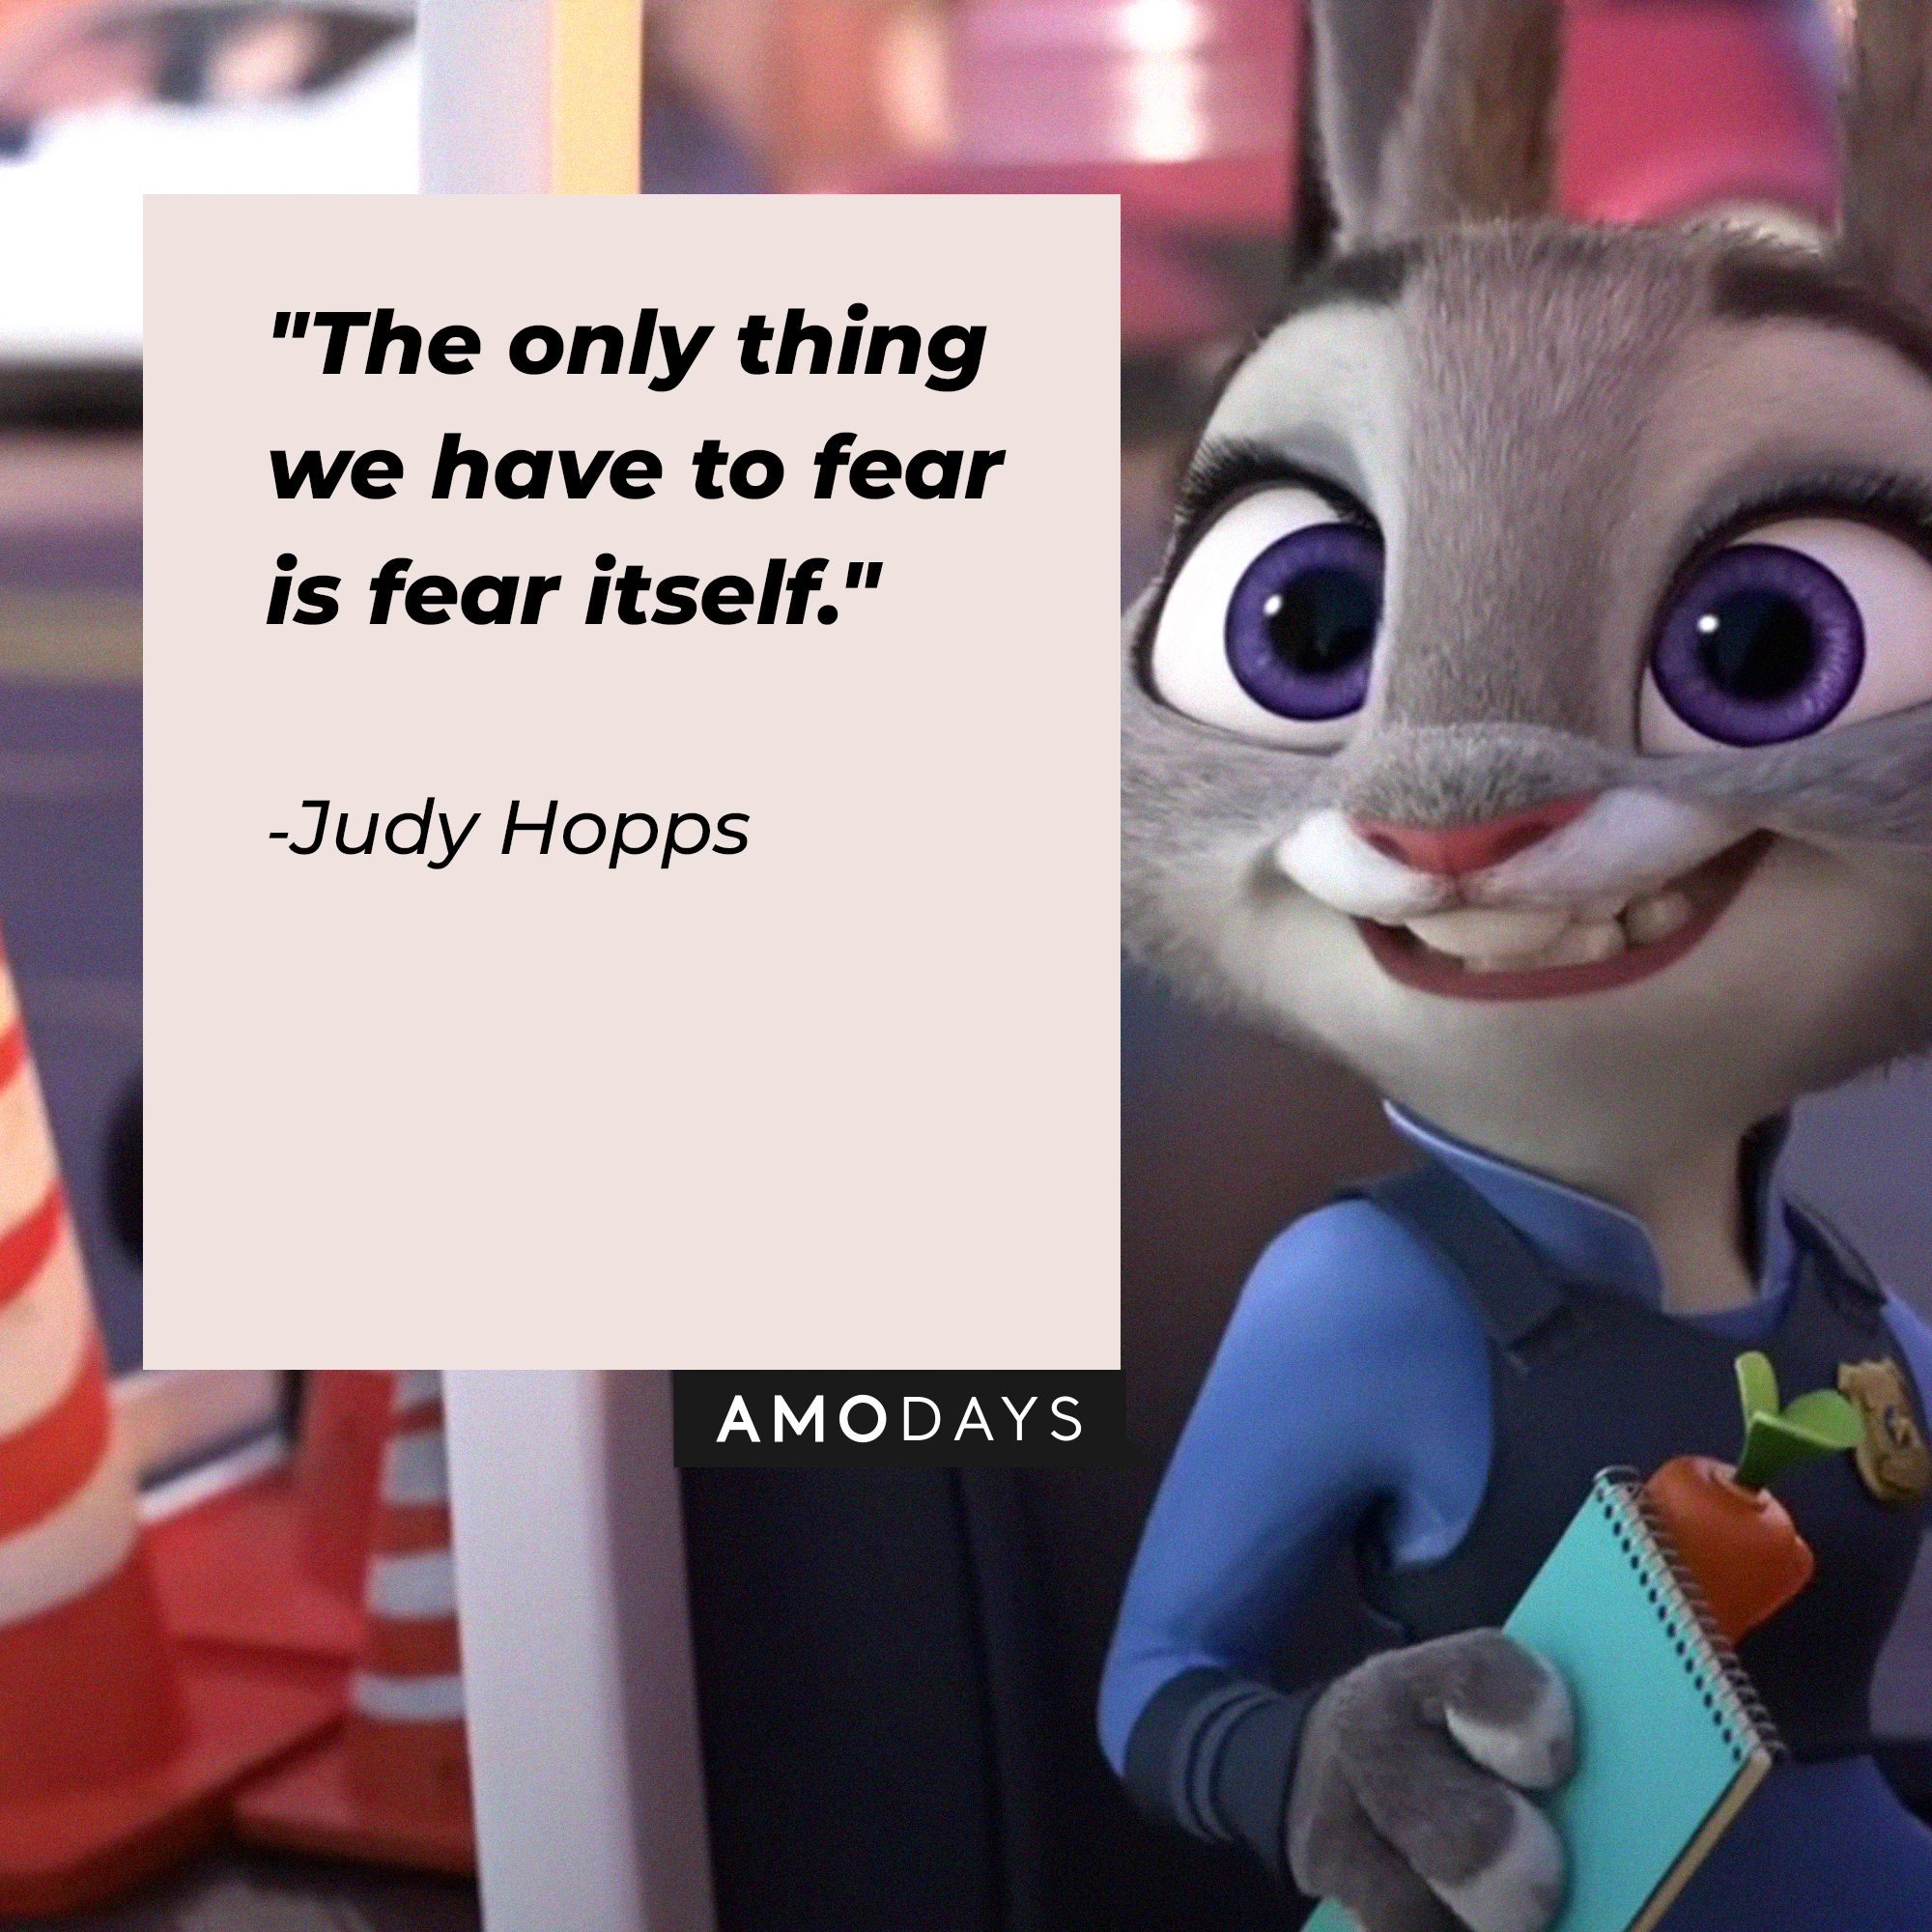 Jody Hopps' quote: "The only thing we have to fear is fear itself." | Source: facebook.com/DisneyZootopia